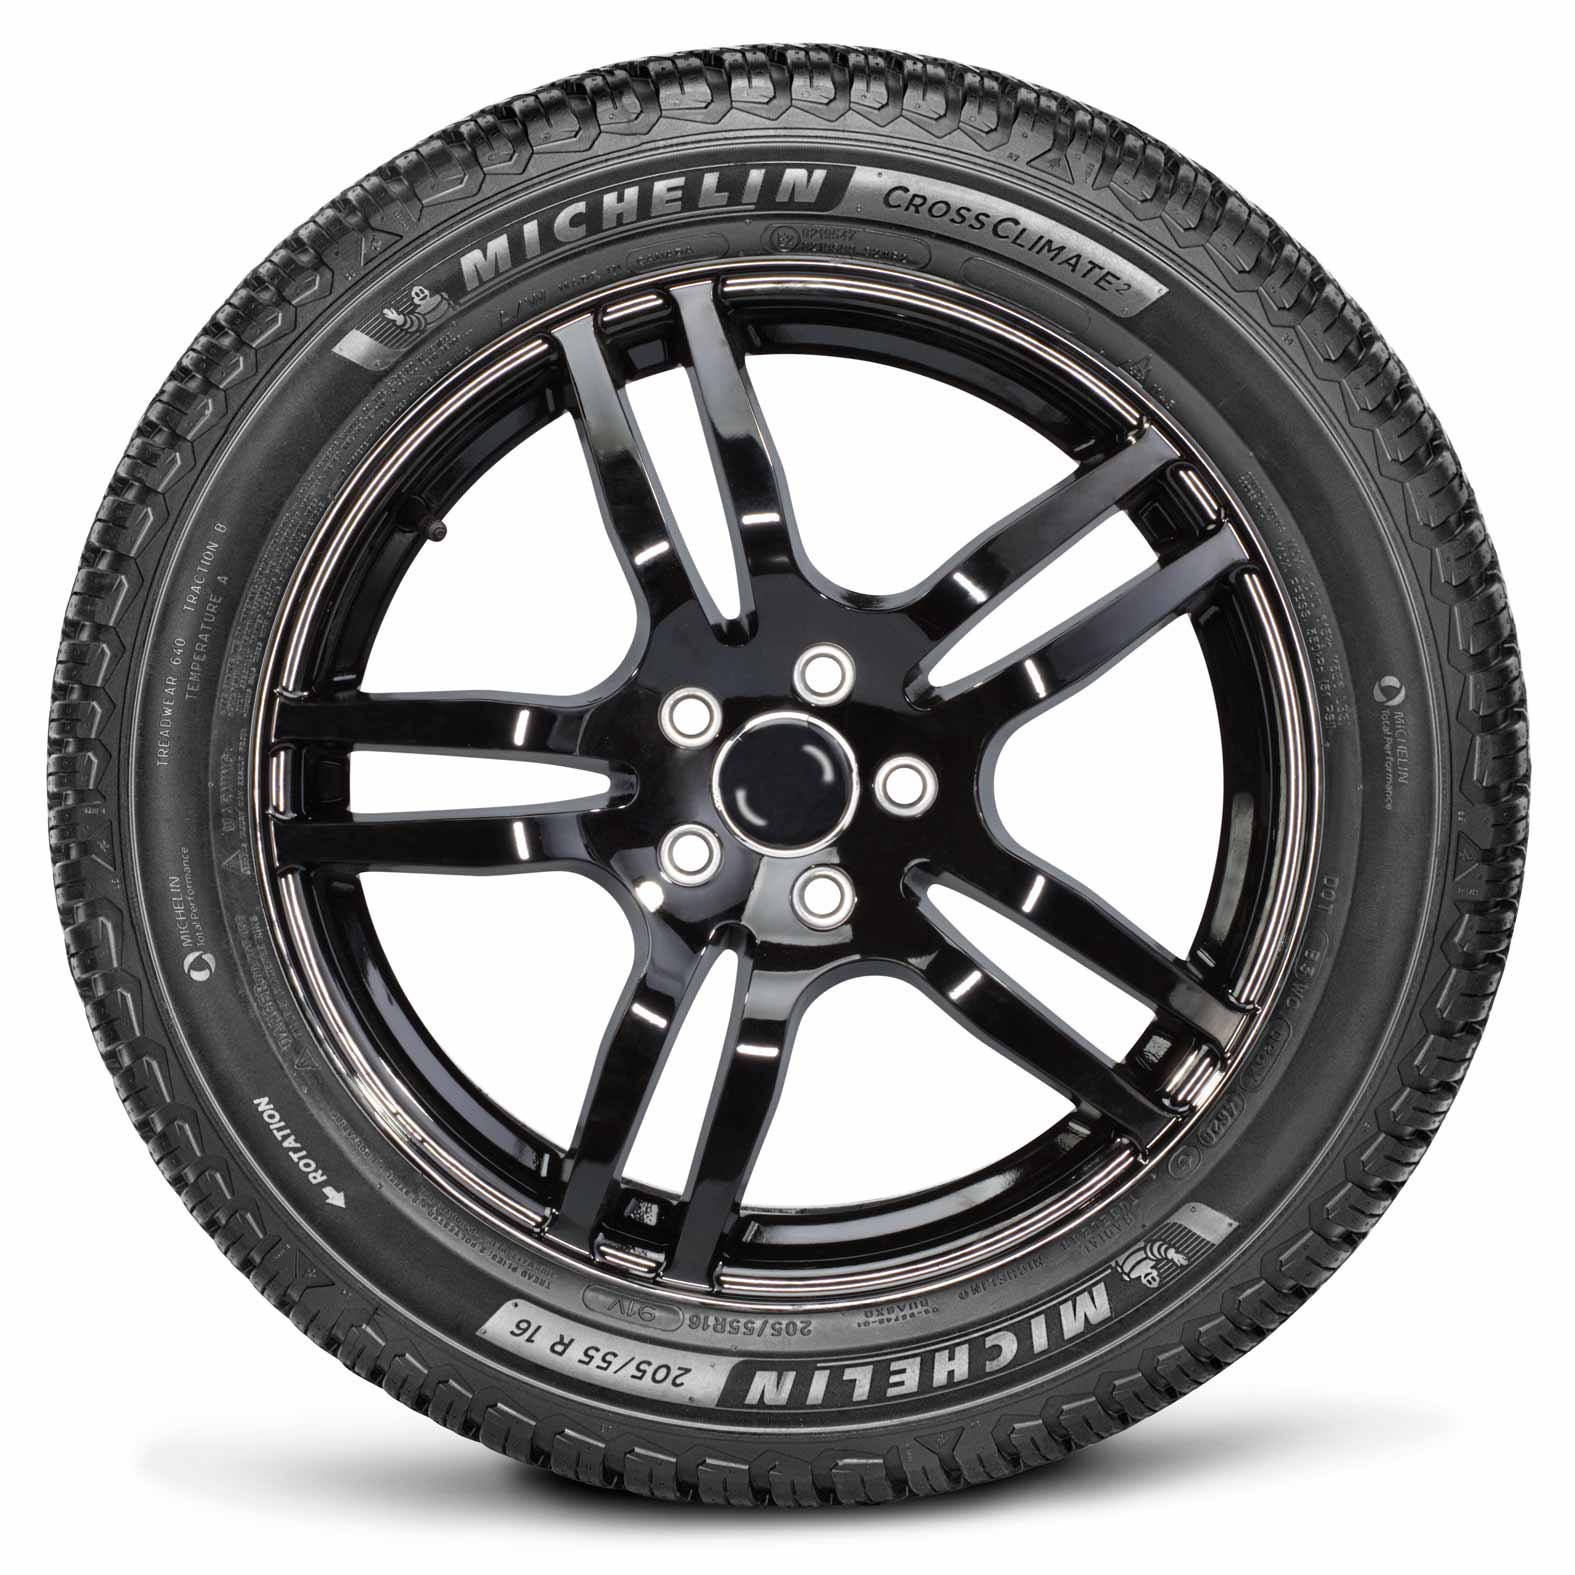 Michelin CrossClimate 2 Tires for All-Weather | Kal Tire